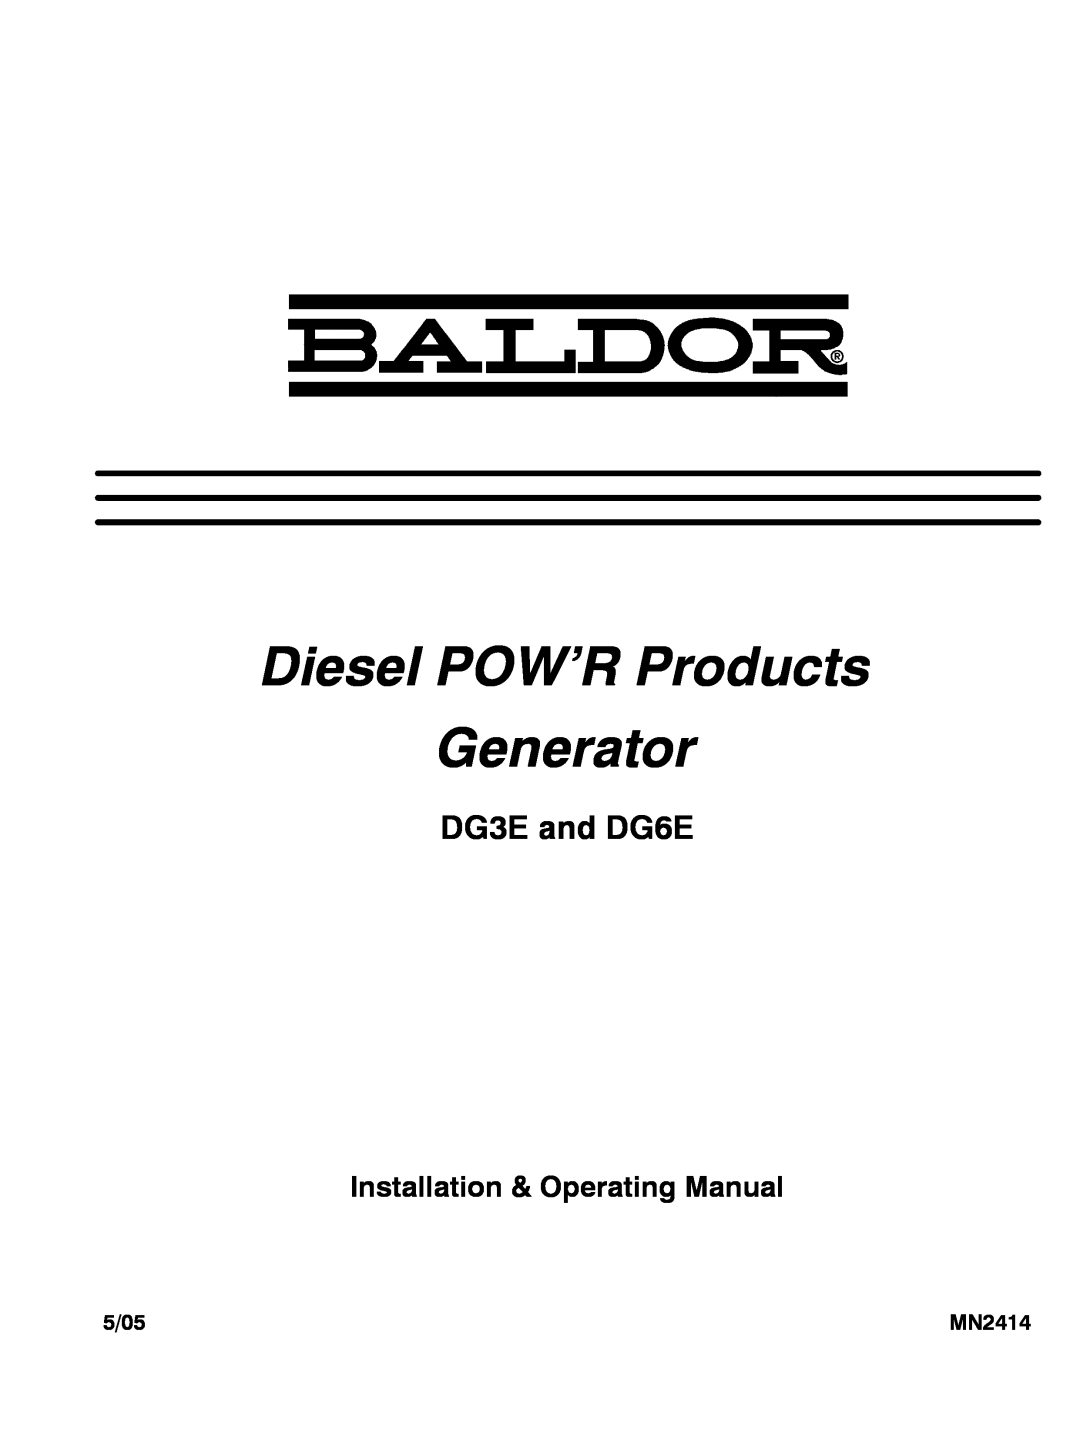 Baldor manual Diesel POW’R Products, Generator, DG3E and DG6E, Installation & Operating Manual, 5/05, MN2414 